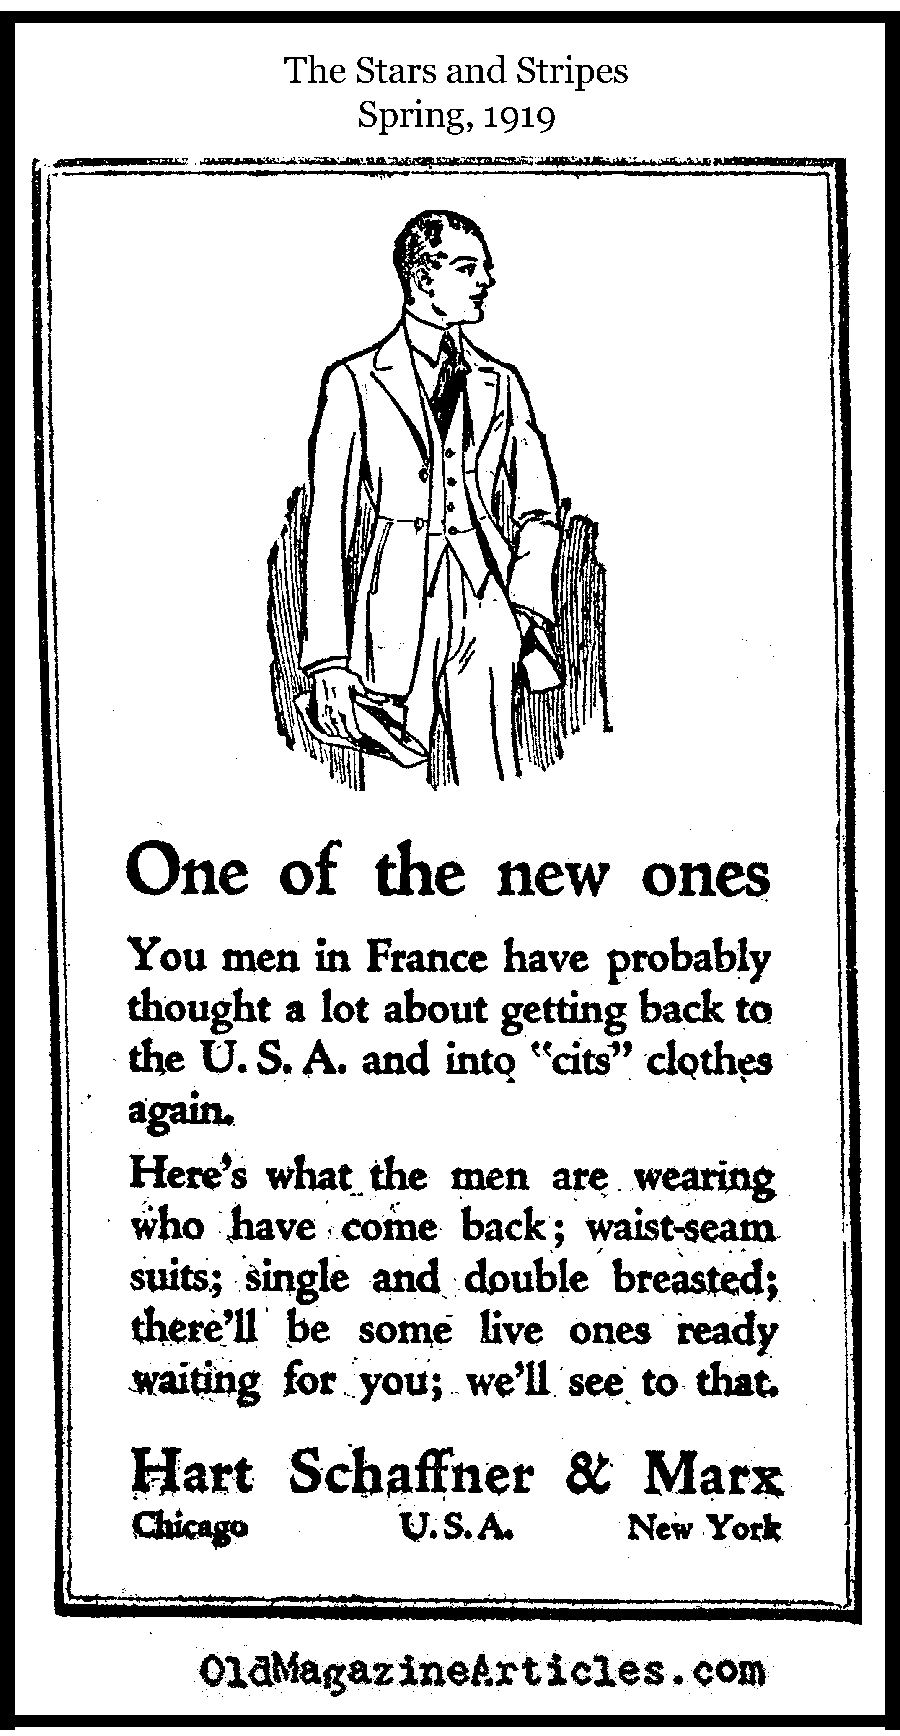 The Side-Seam Suit   (The Stars and Stripes, 1919)